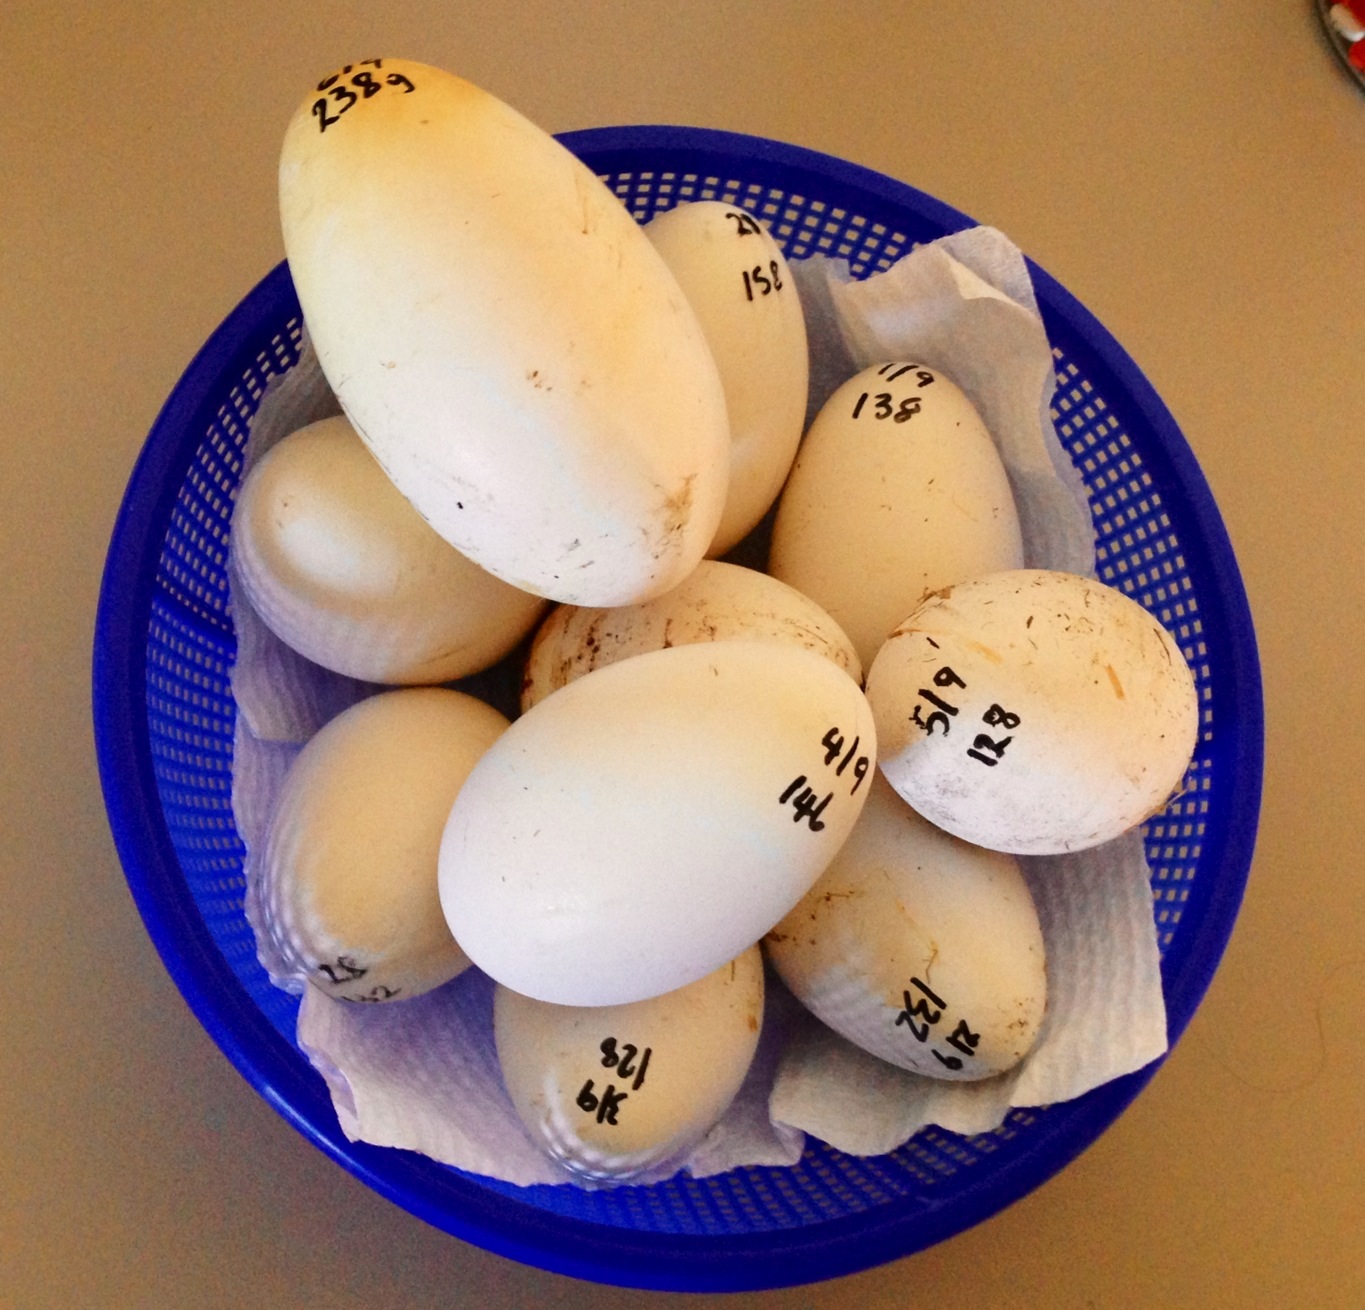 The weeks batch of geese eggs including peppers whopper